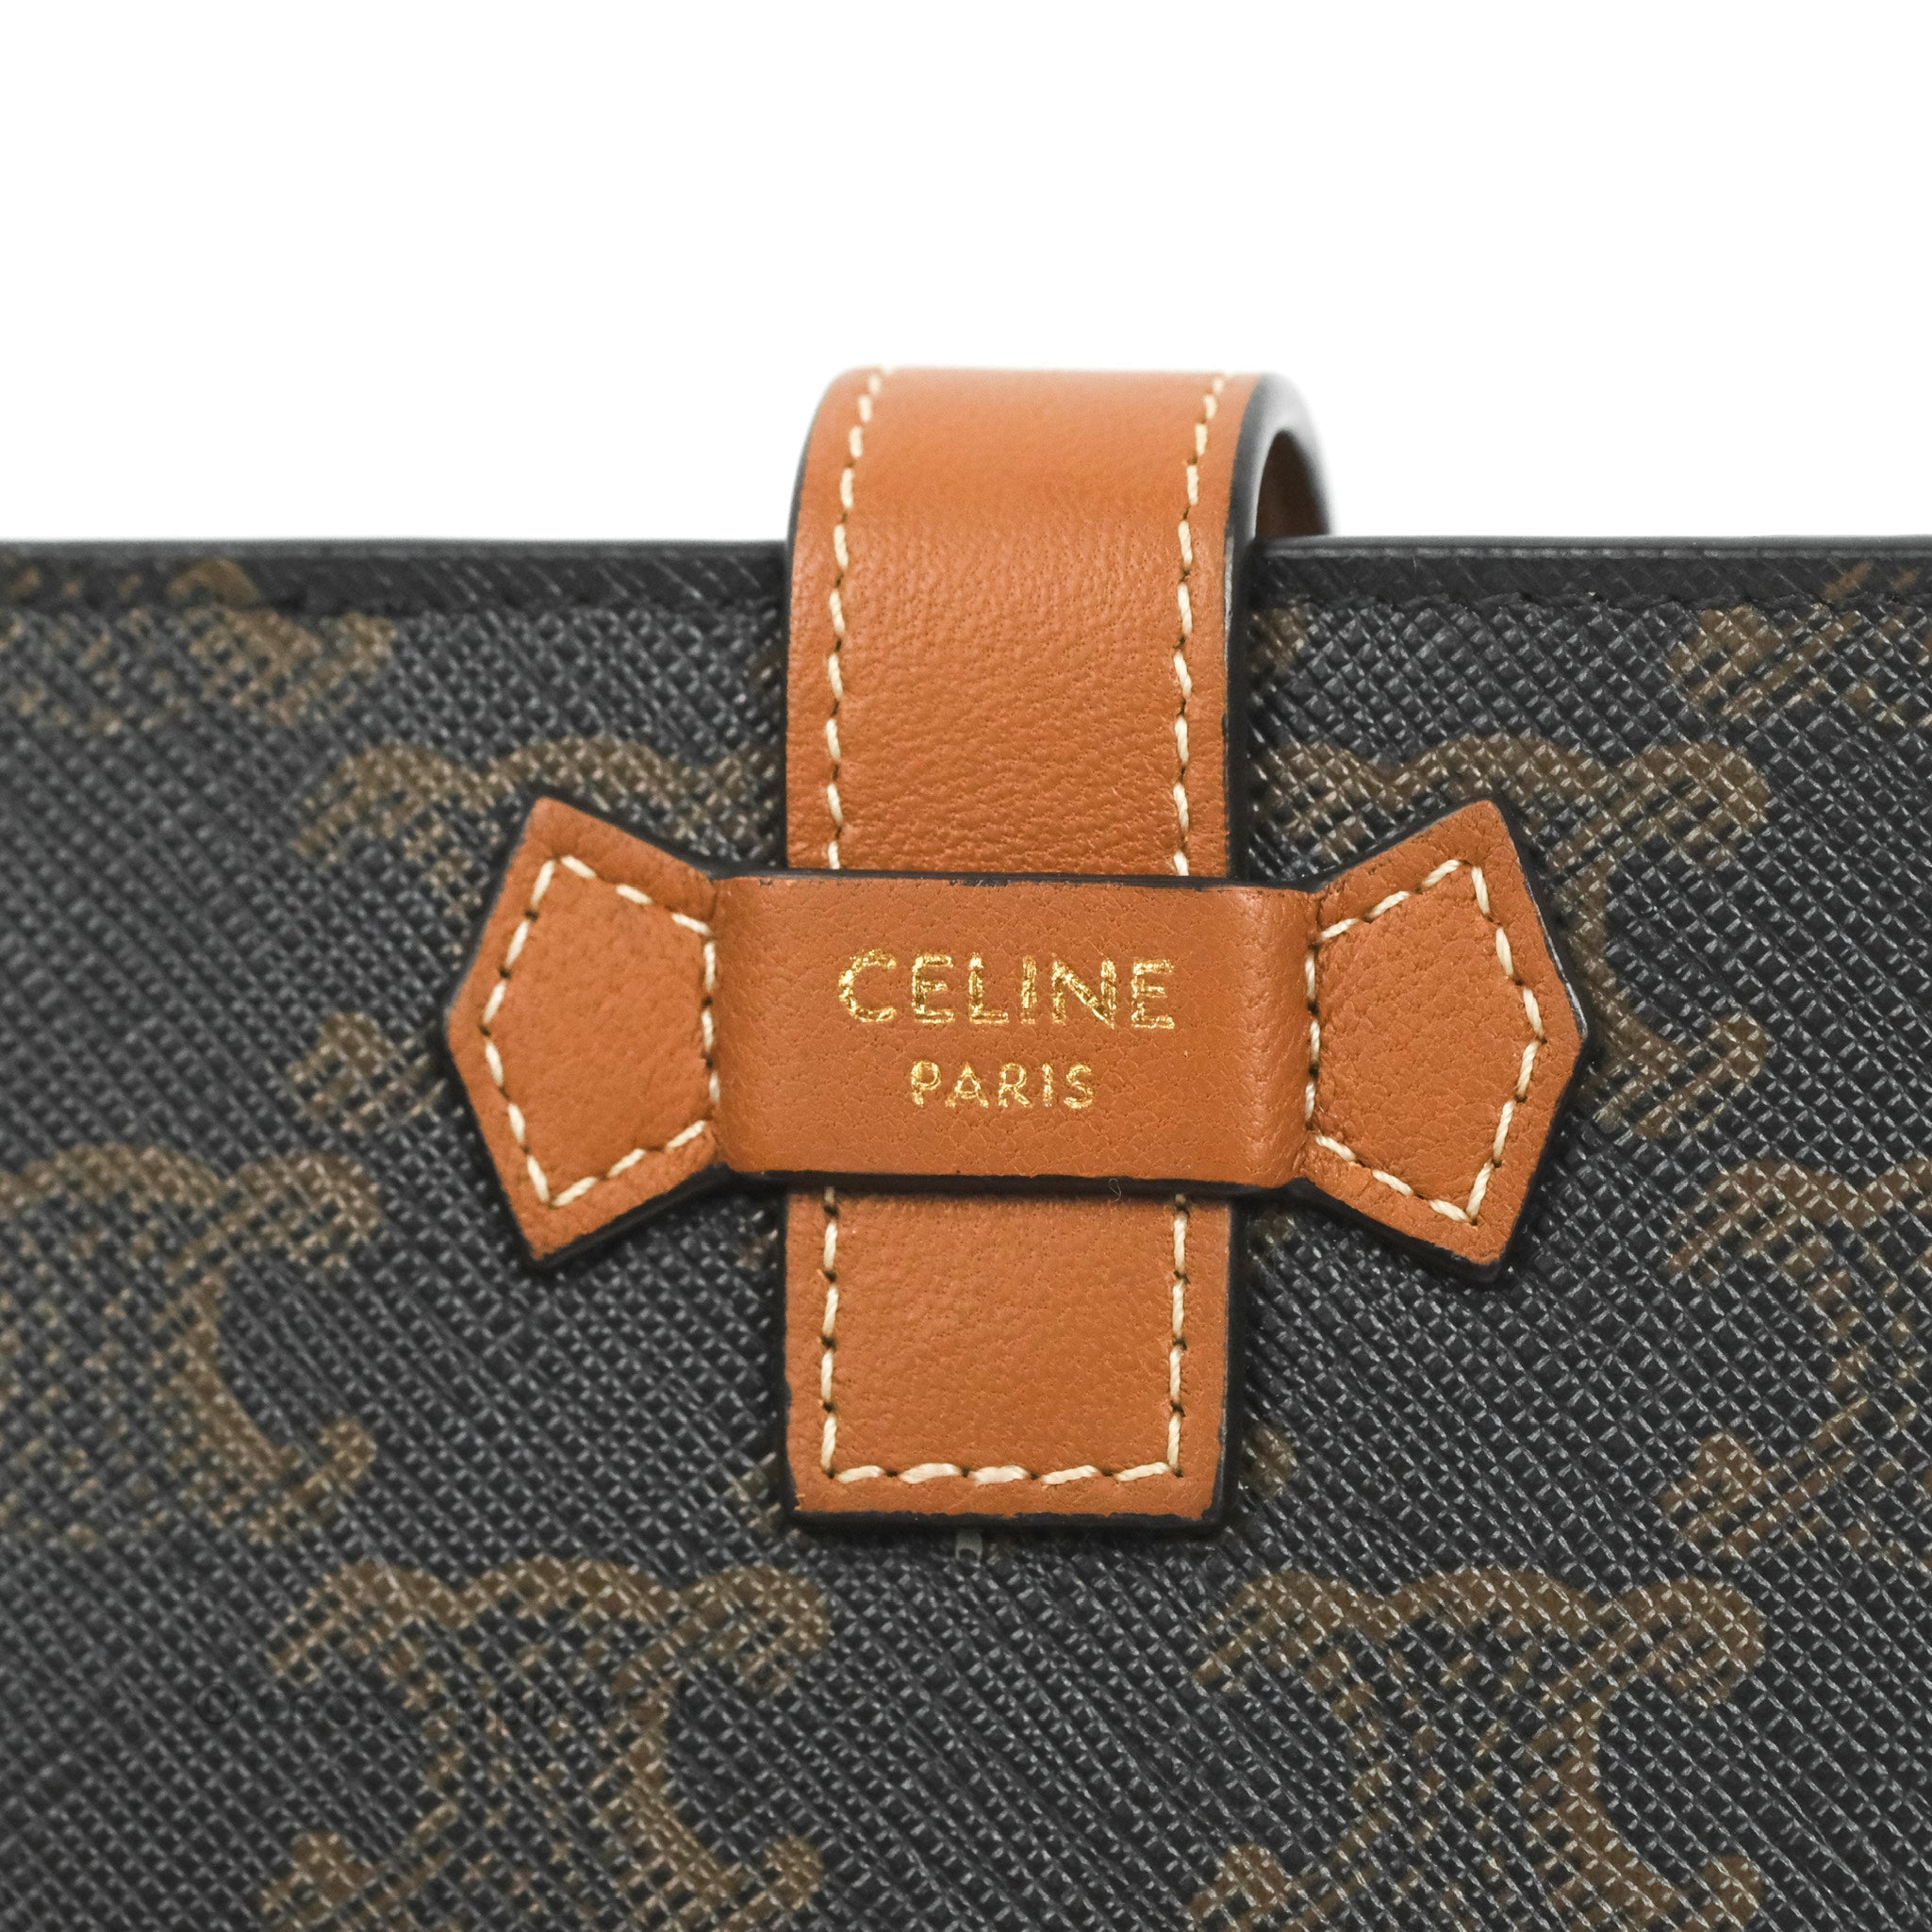 Shop CELINE Triomphe Wallet on strap in triomphe canvas and smooth lambskin  (10D852CG9.04LU) by ☆brillant☆